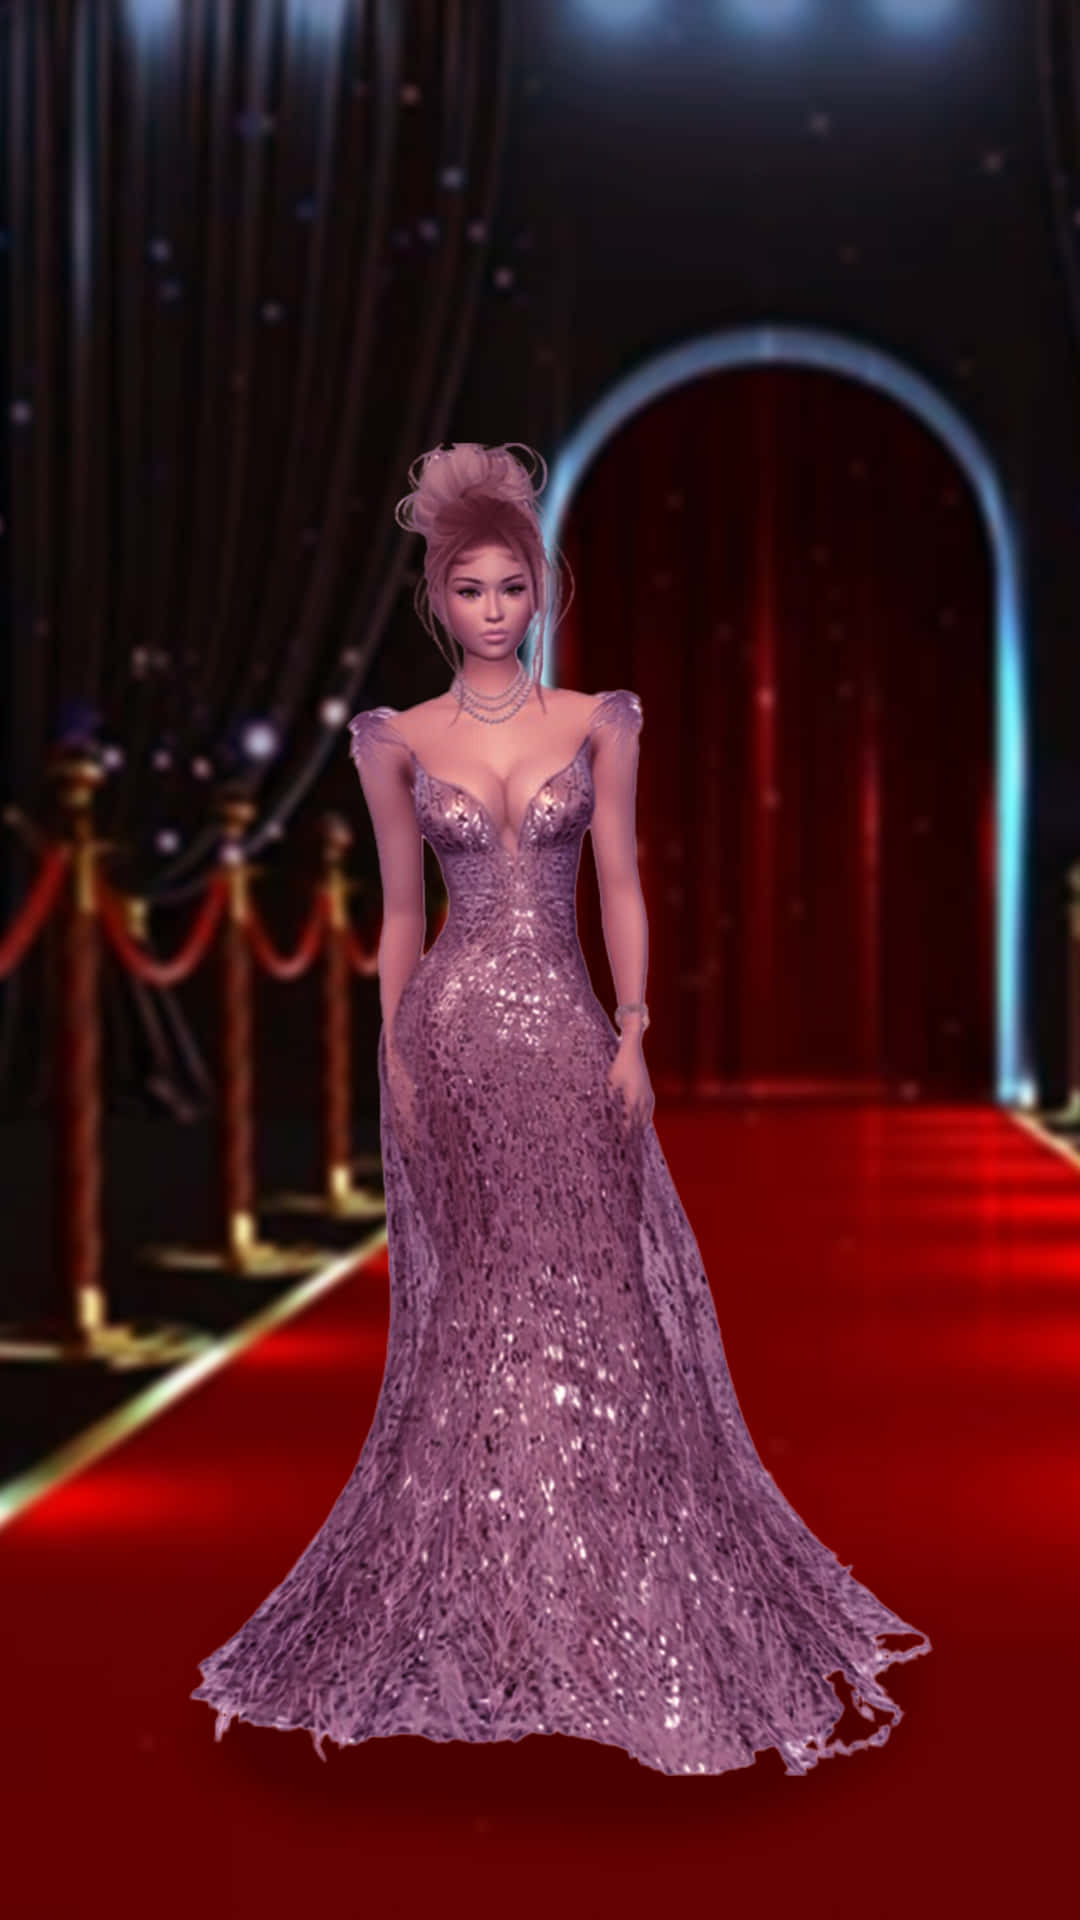 Caption: Sparkling Gown Delight On Imvu Background